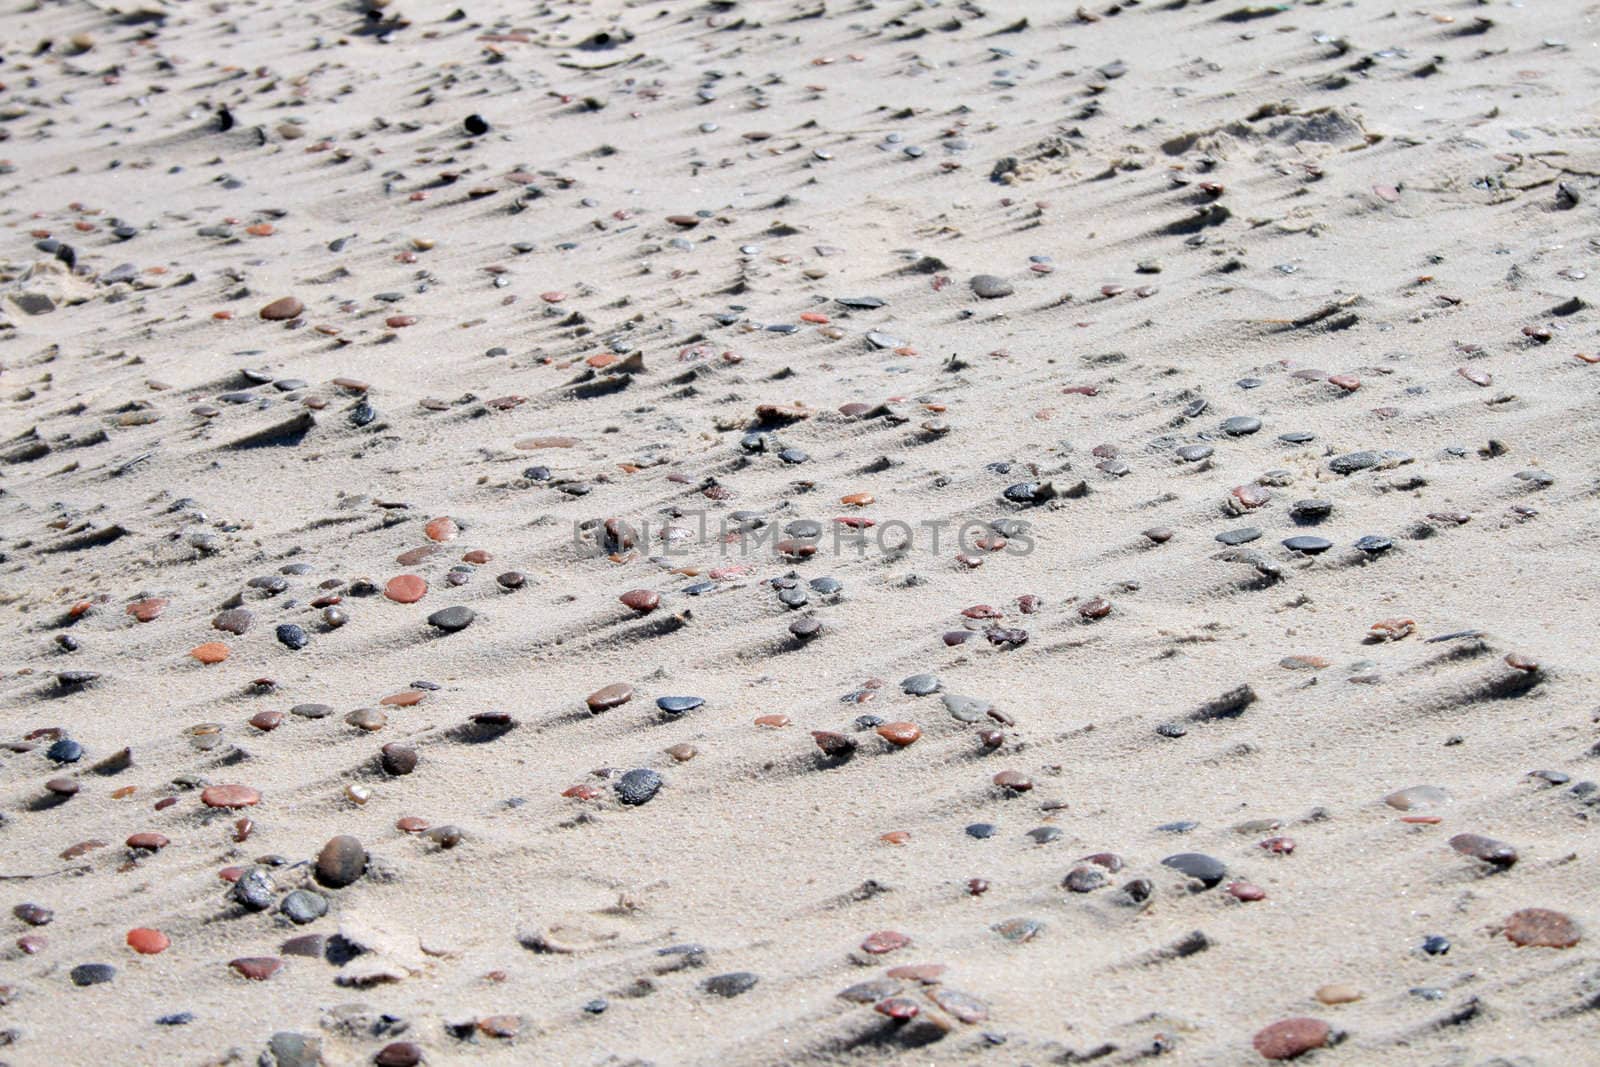 Natural sand and stone pattern on the beach, caused by the wind
